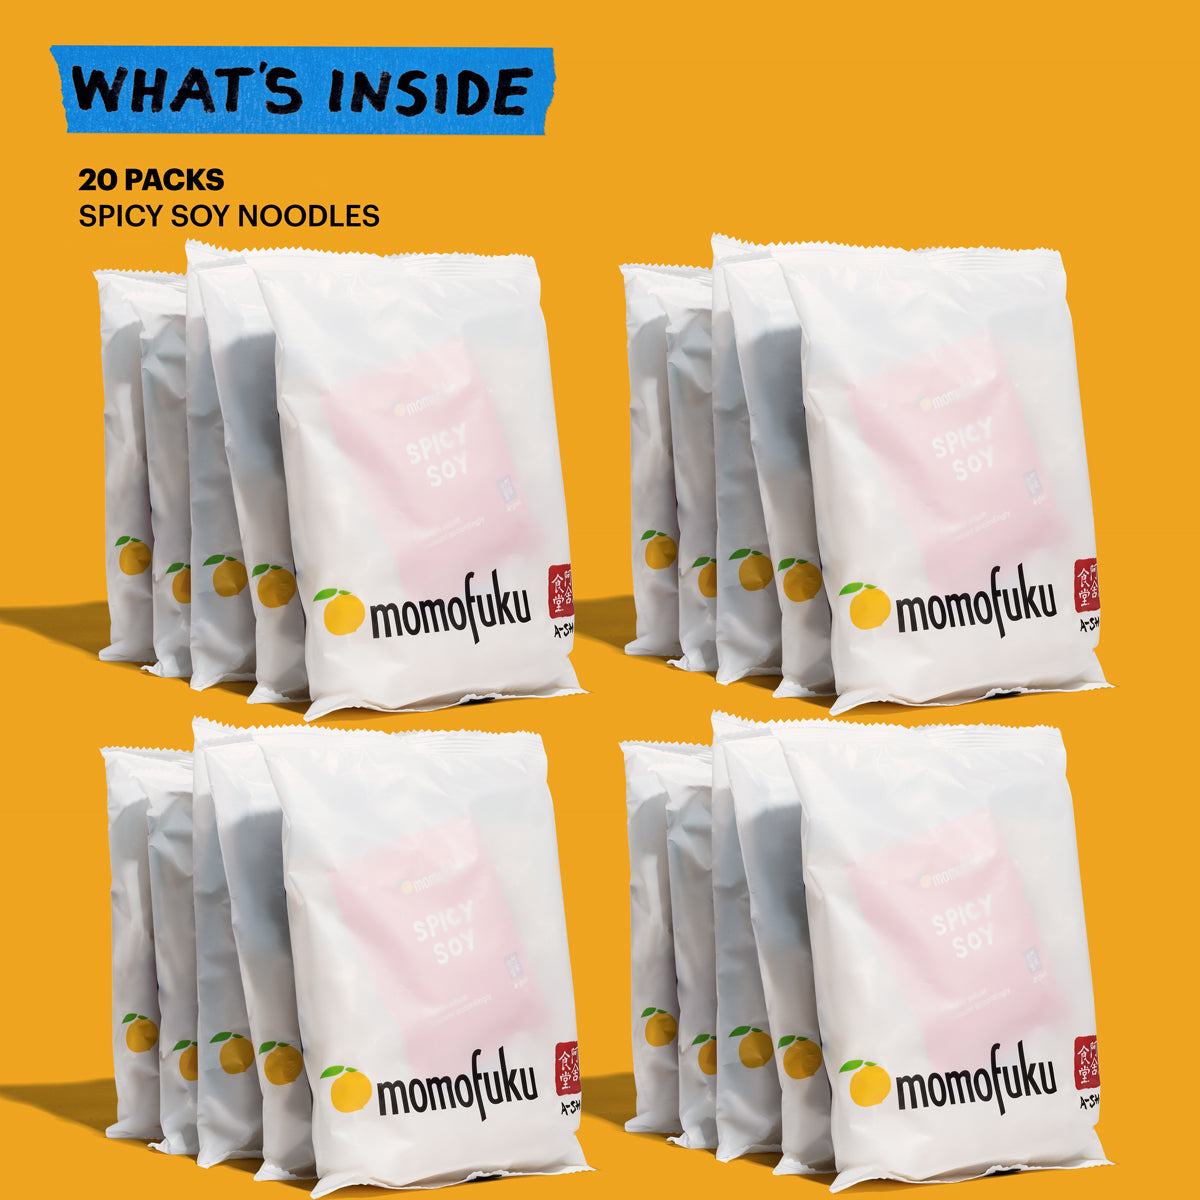 What's inside: 20 packs spicy soy noodles